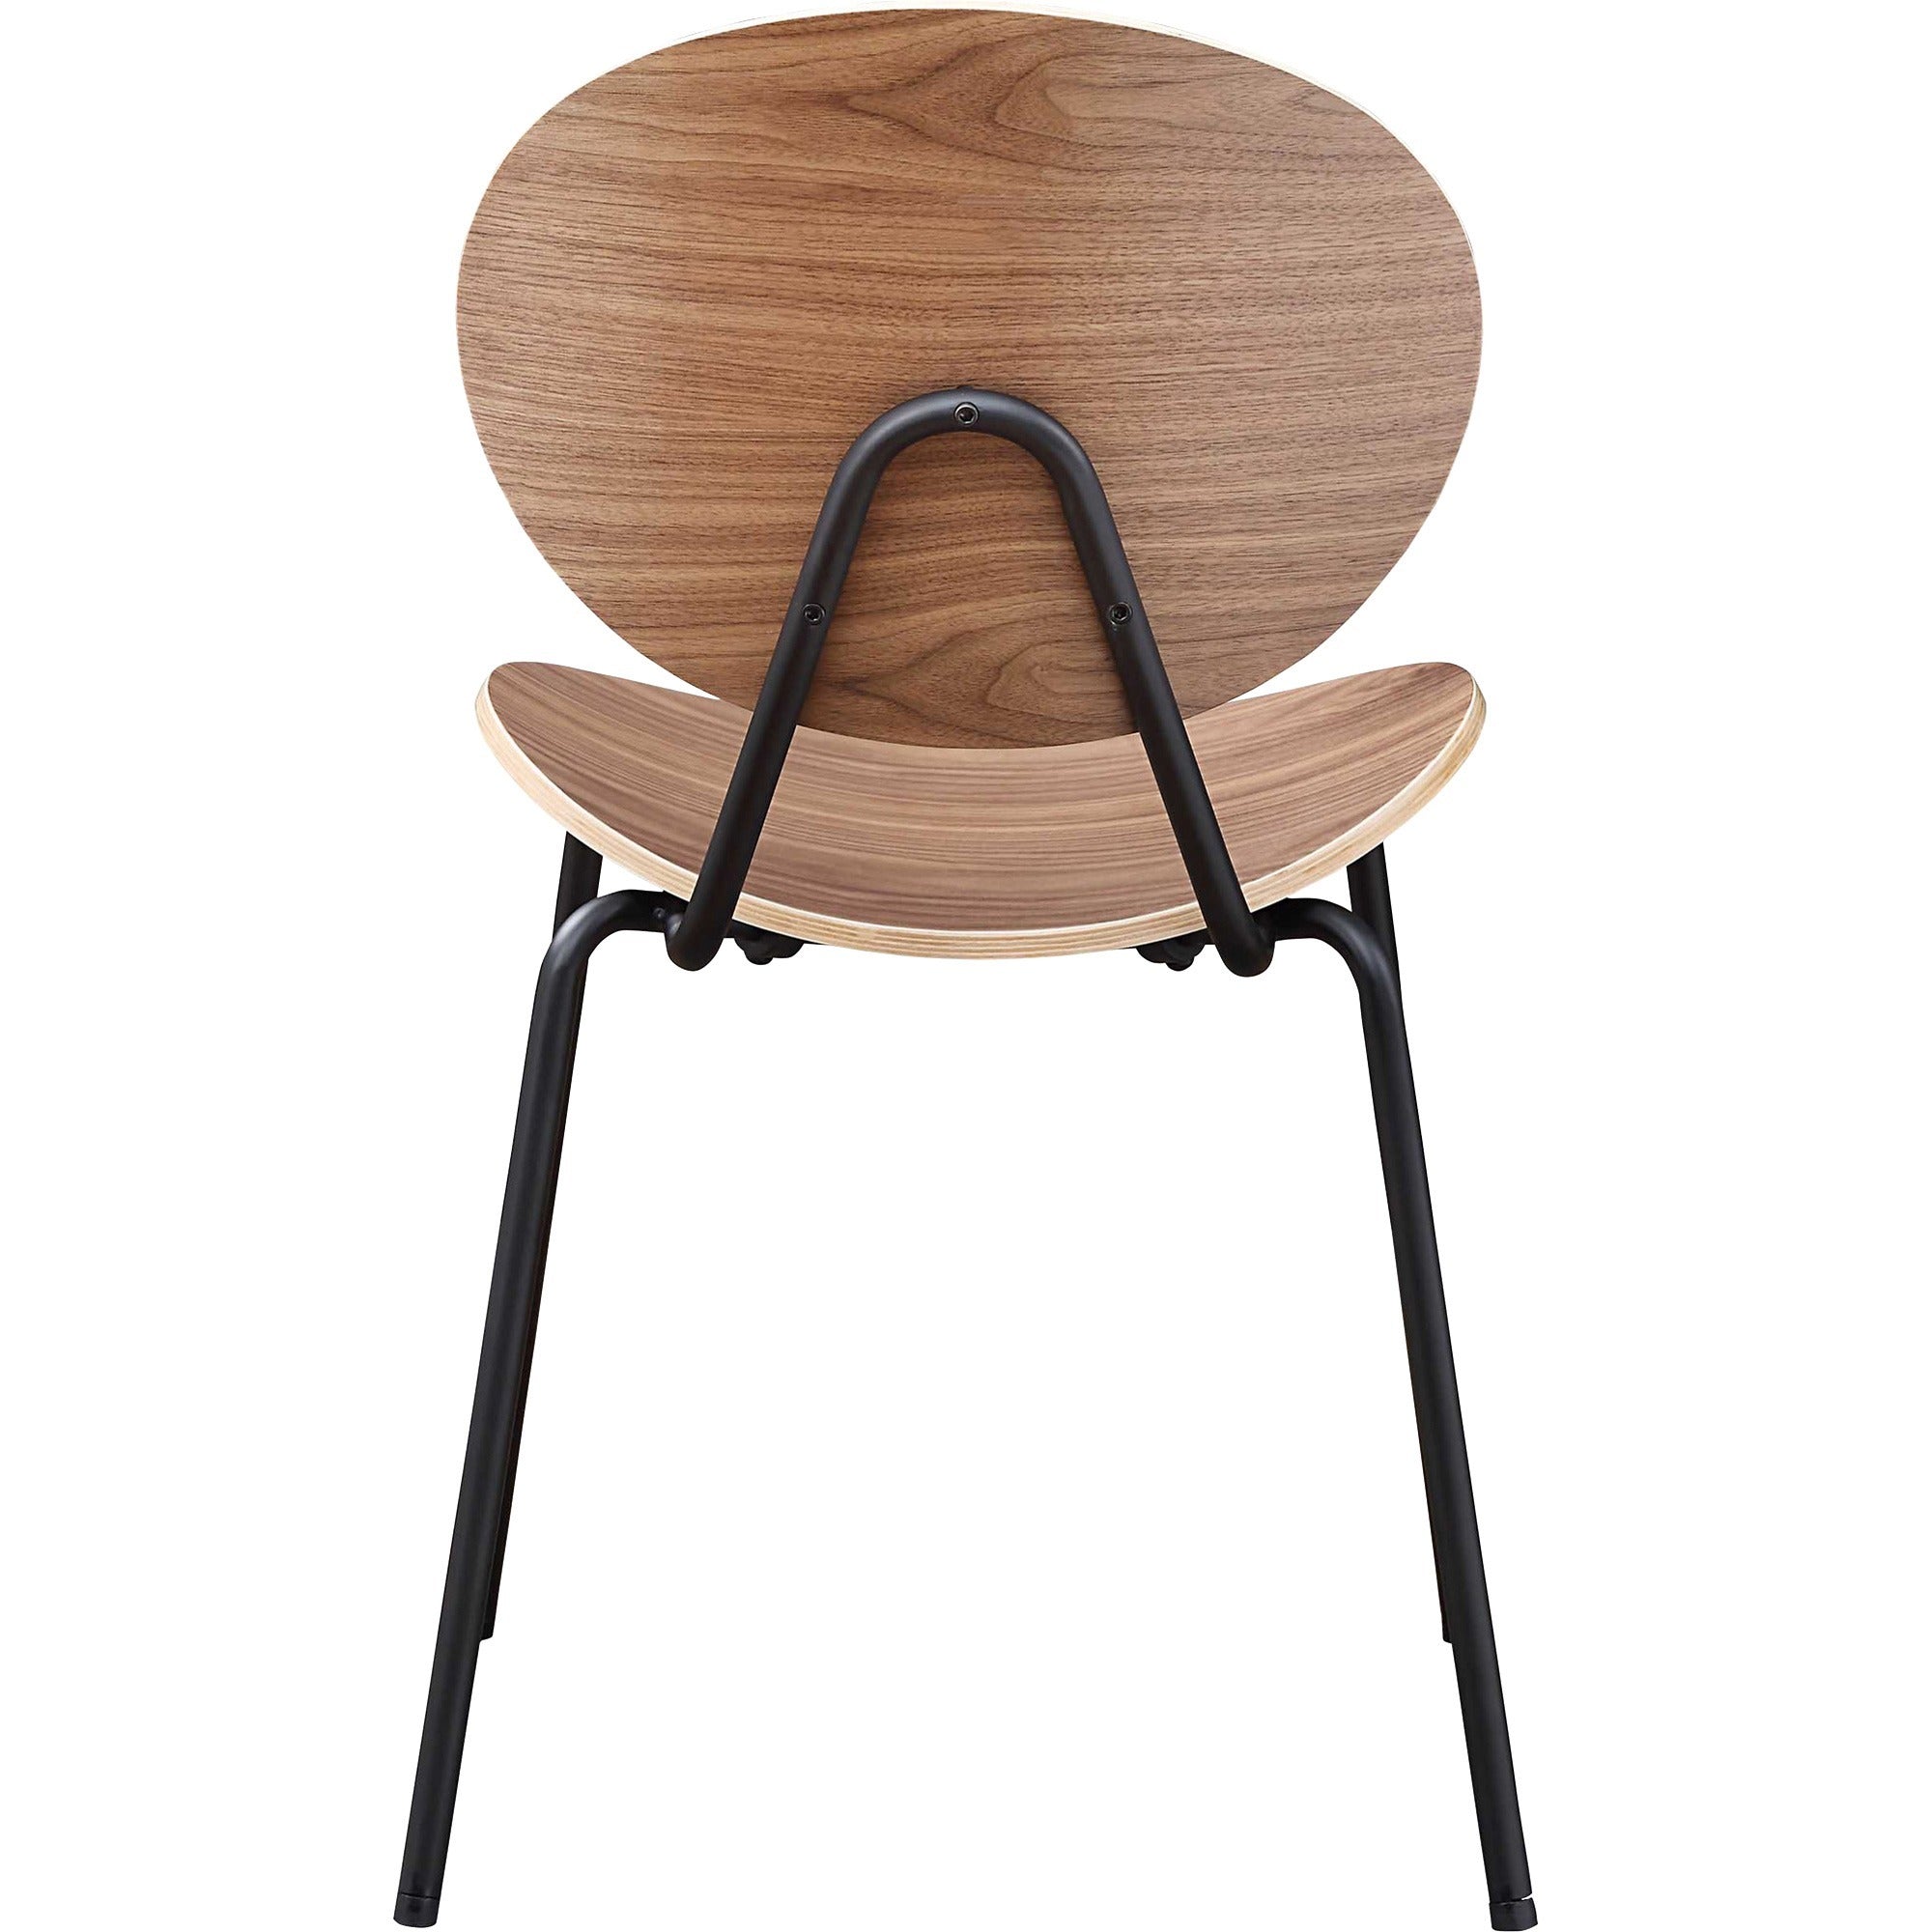 lorell-bentwood-cafe-chairs-plywood-seat-plywood-back-metal-powder-coated-steel-frame-walnut-2-carton_llr42962 - 4